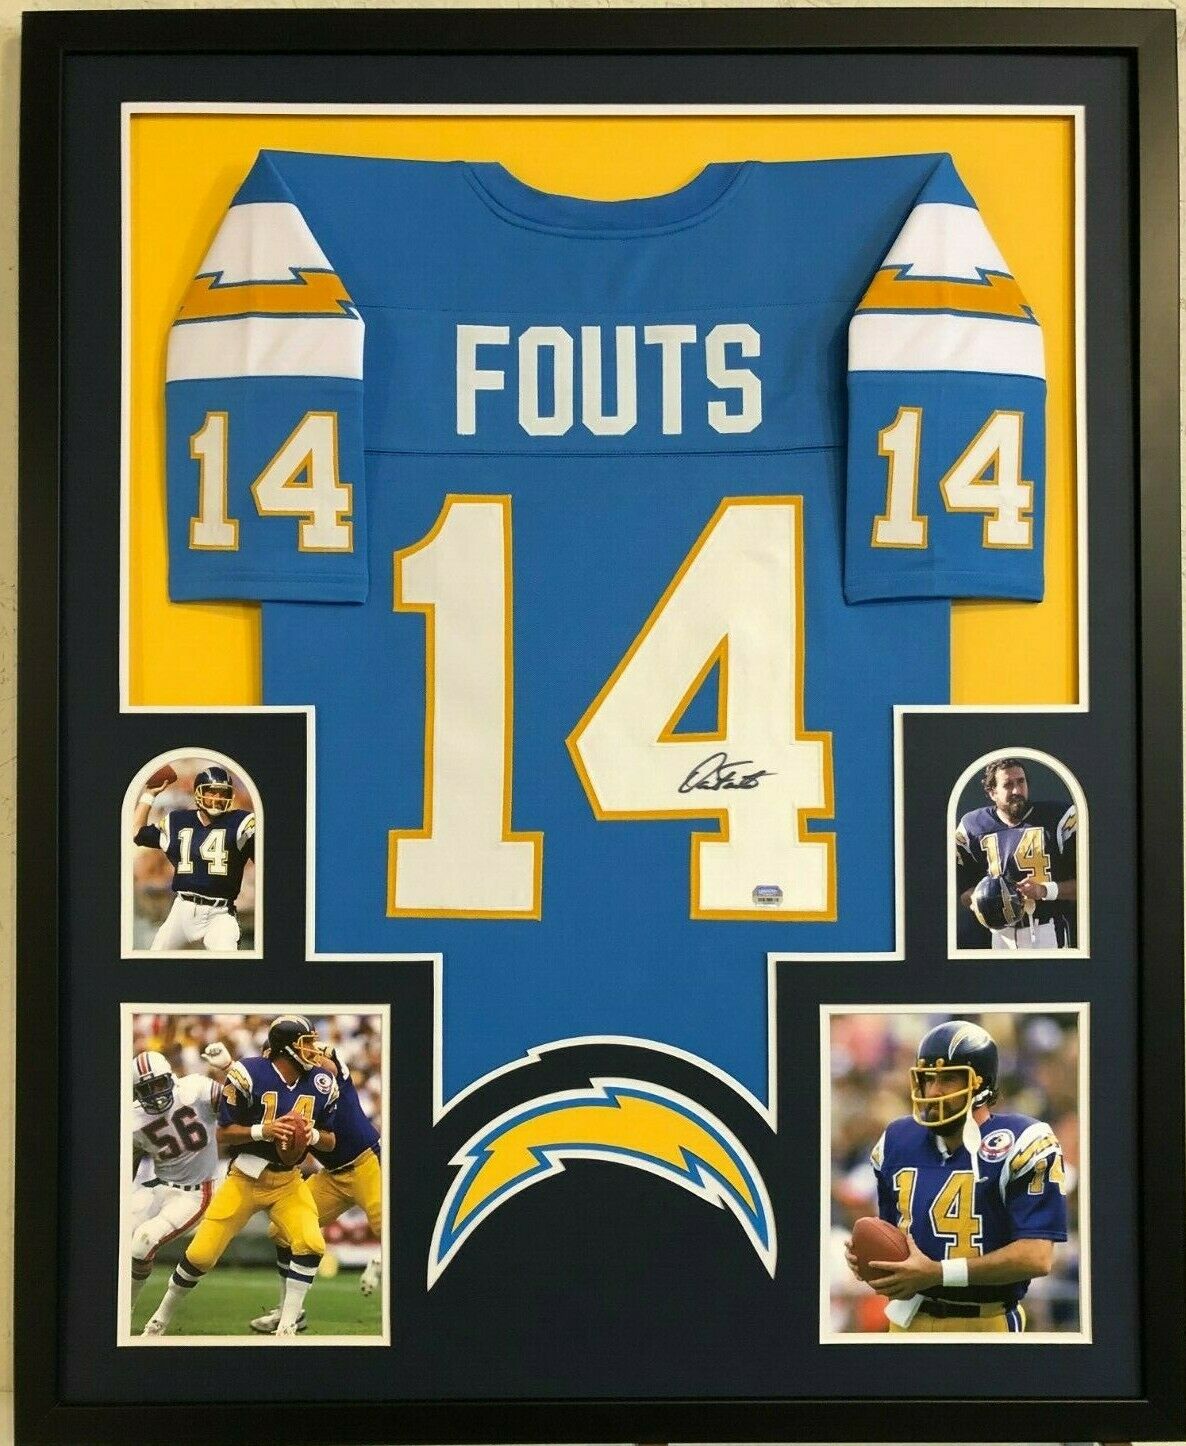 fouts chargers jersey